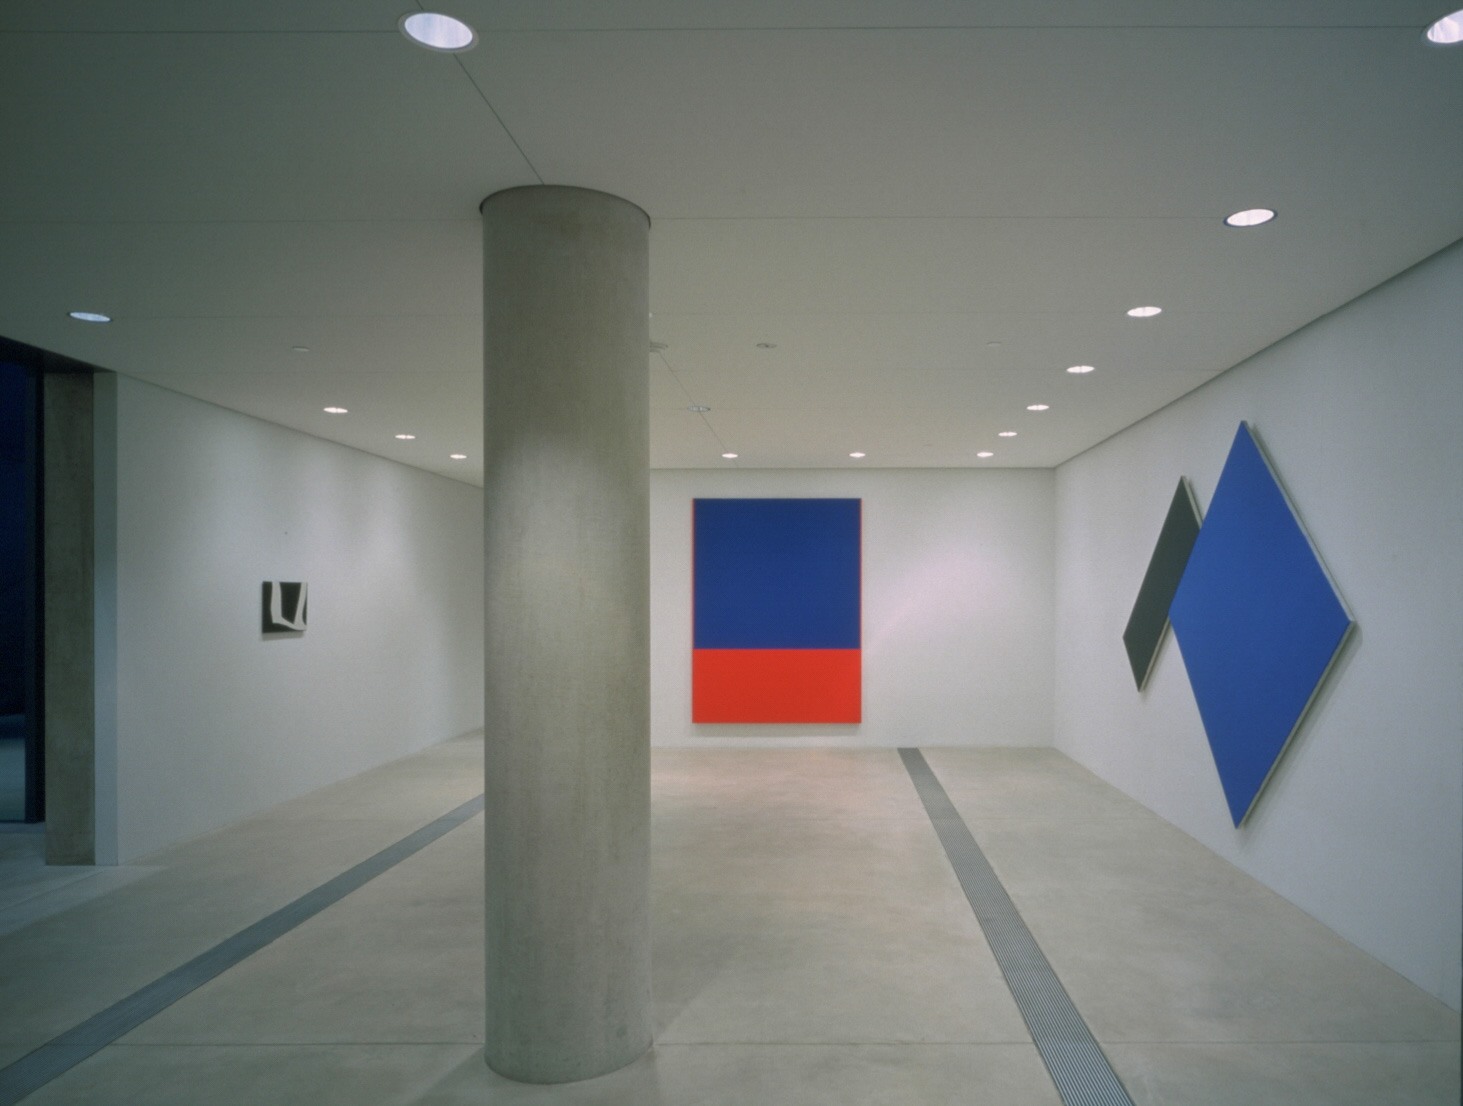 A view of Kelly's work in the Entrance Gallery, which includes a large blue and black painting, a large blue and orange painting, and a small black and white painting.